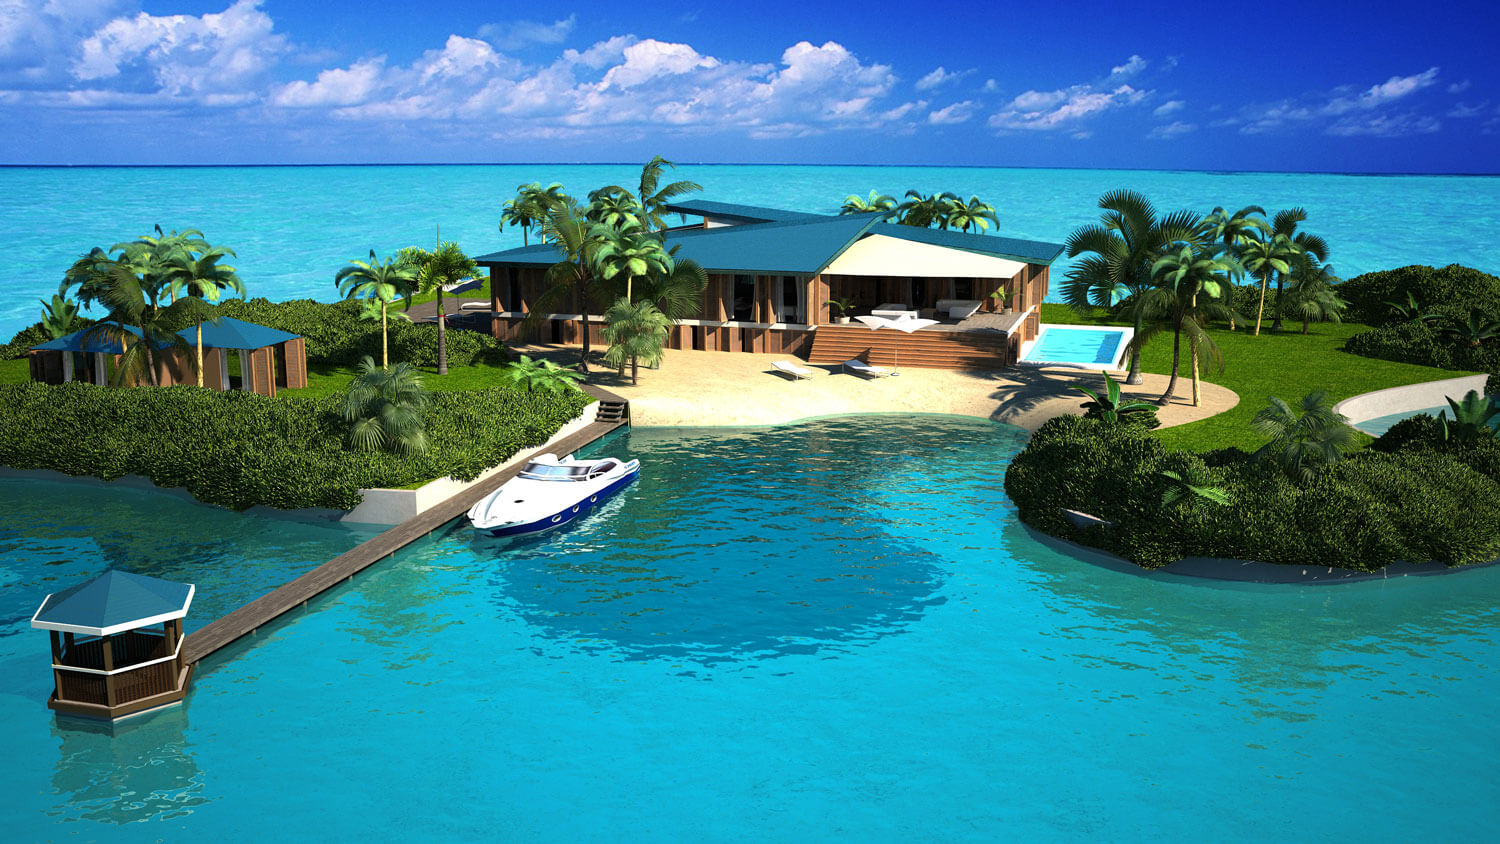 World’s First Floating Islands To Be Built In Maldives